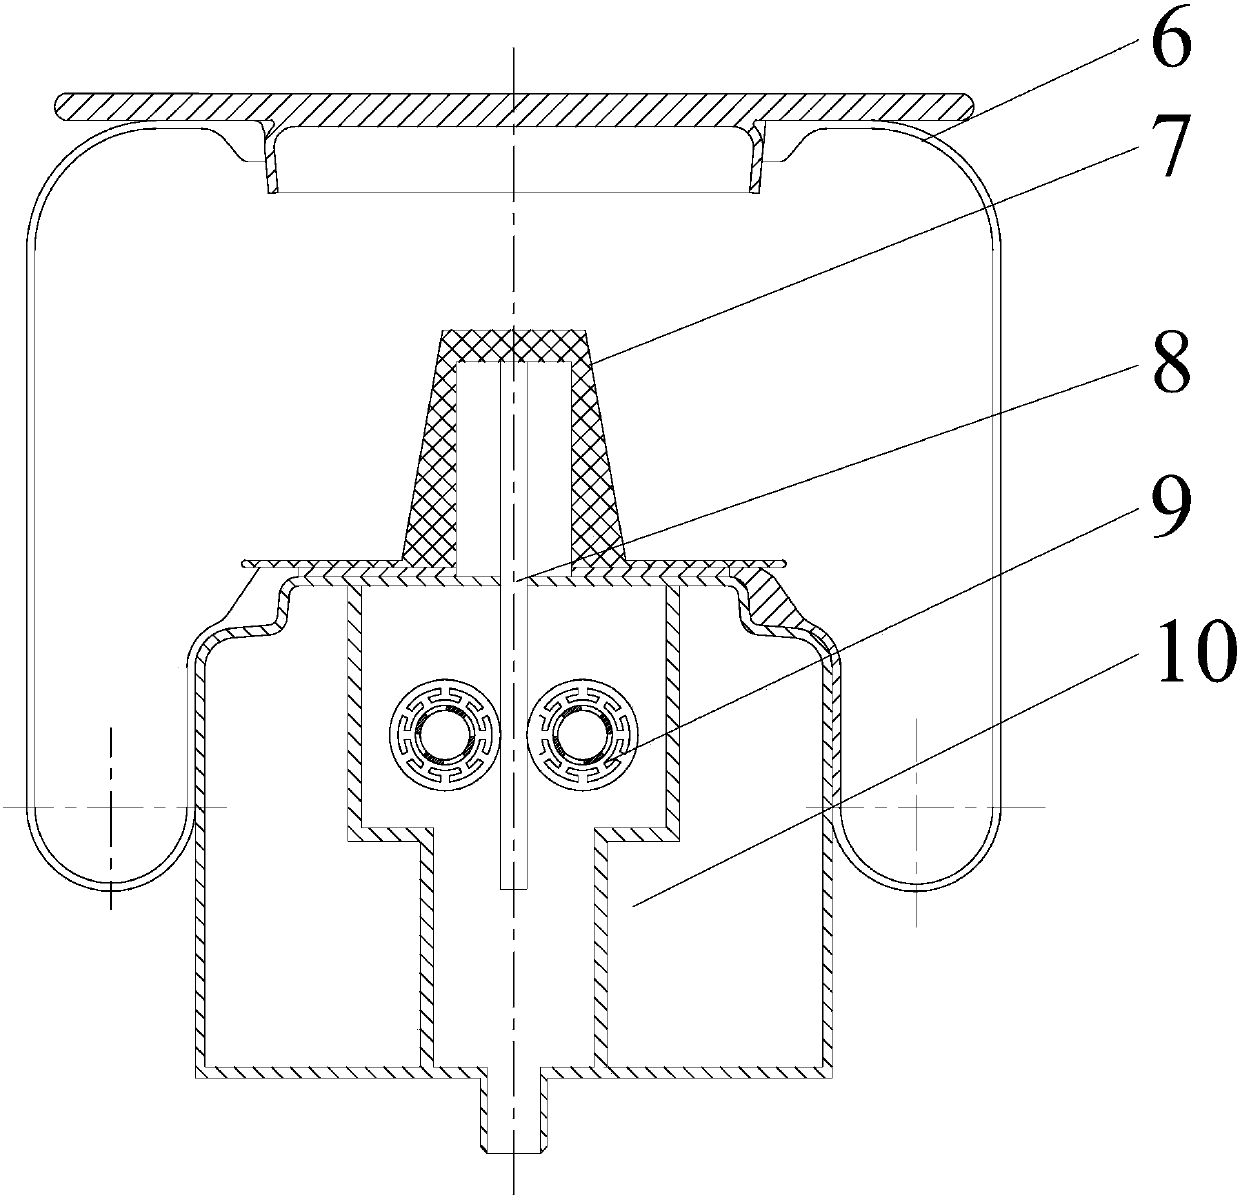 A vibration isolation system with controllable stiffness damping and inertia force and its control method